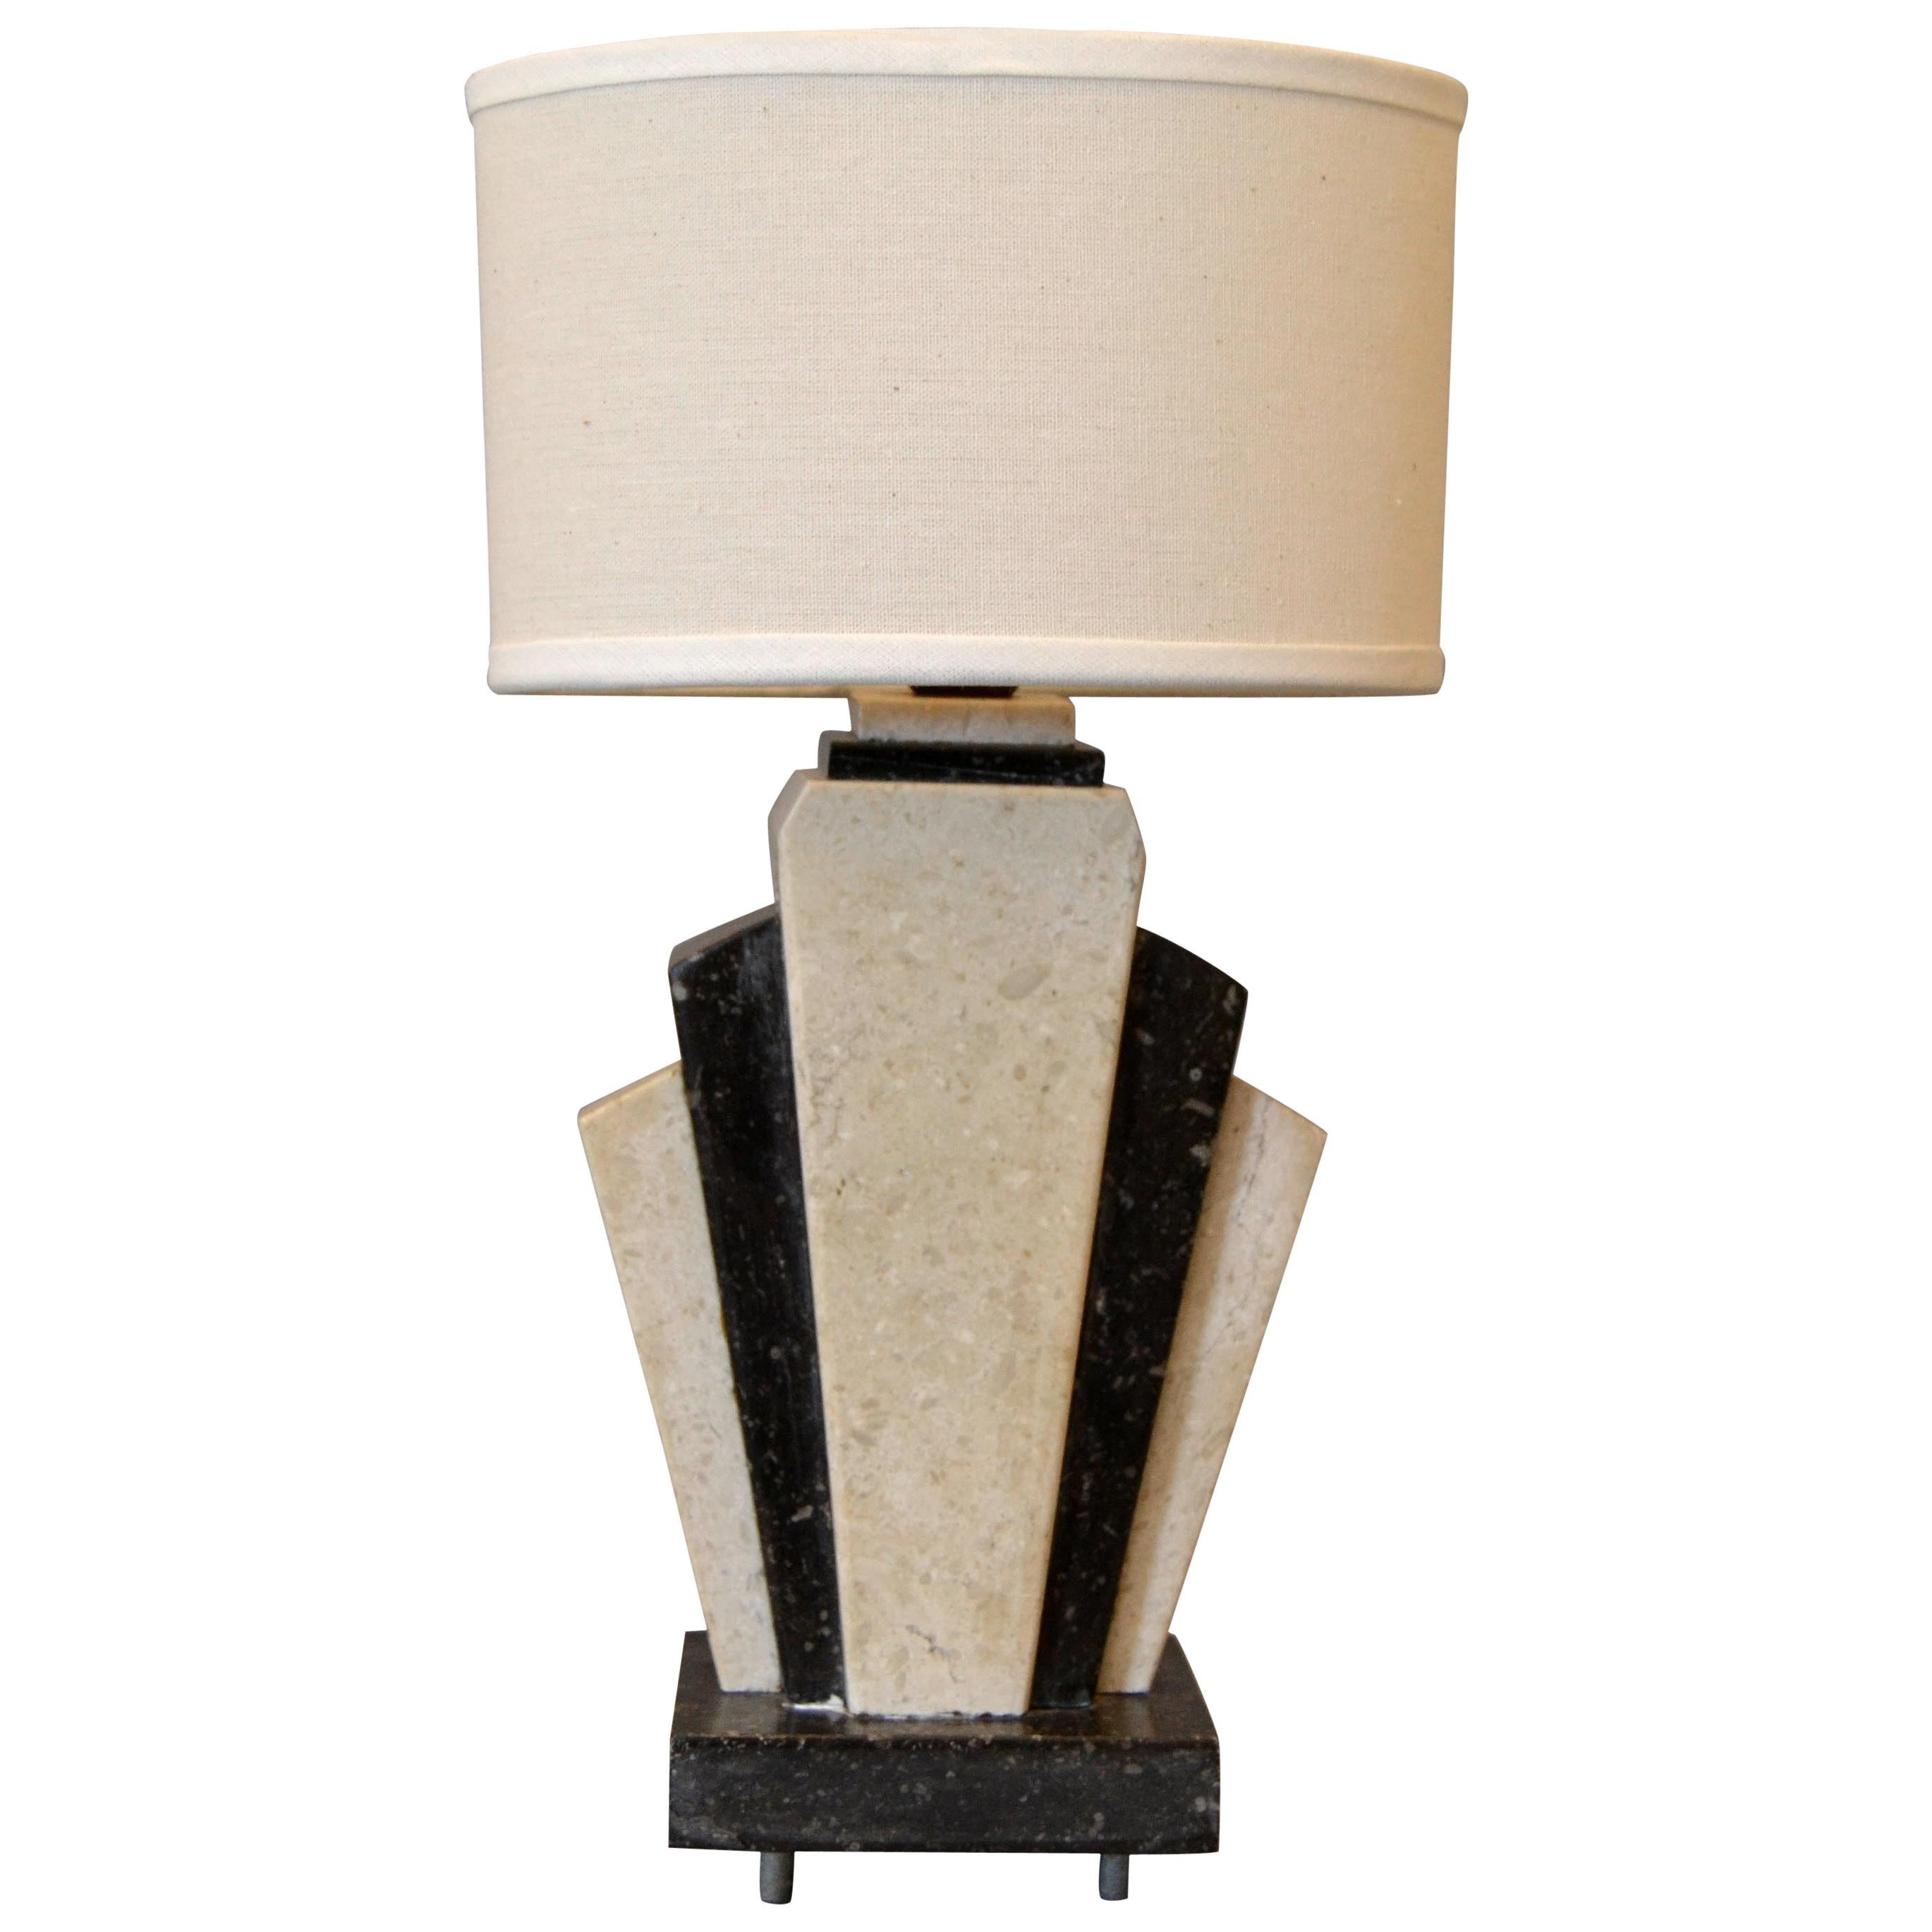 Petite Art Deco Italian Marble Bedside Table Lamp with Oval Shade